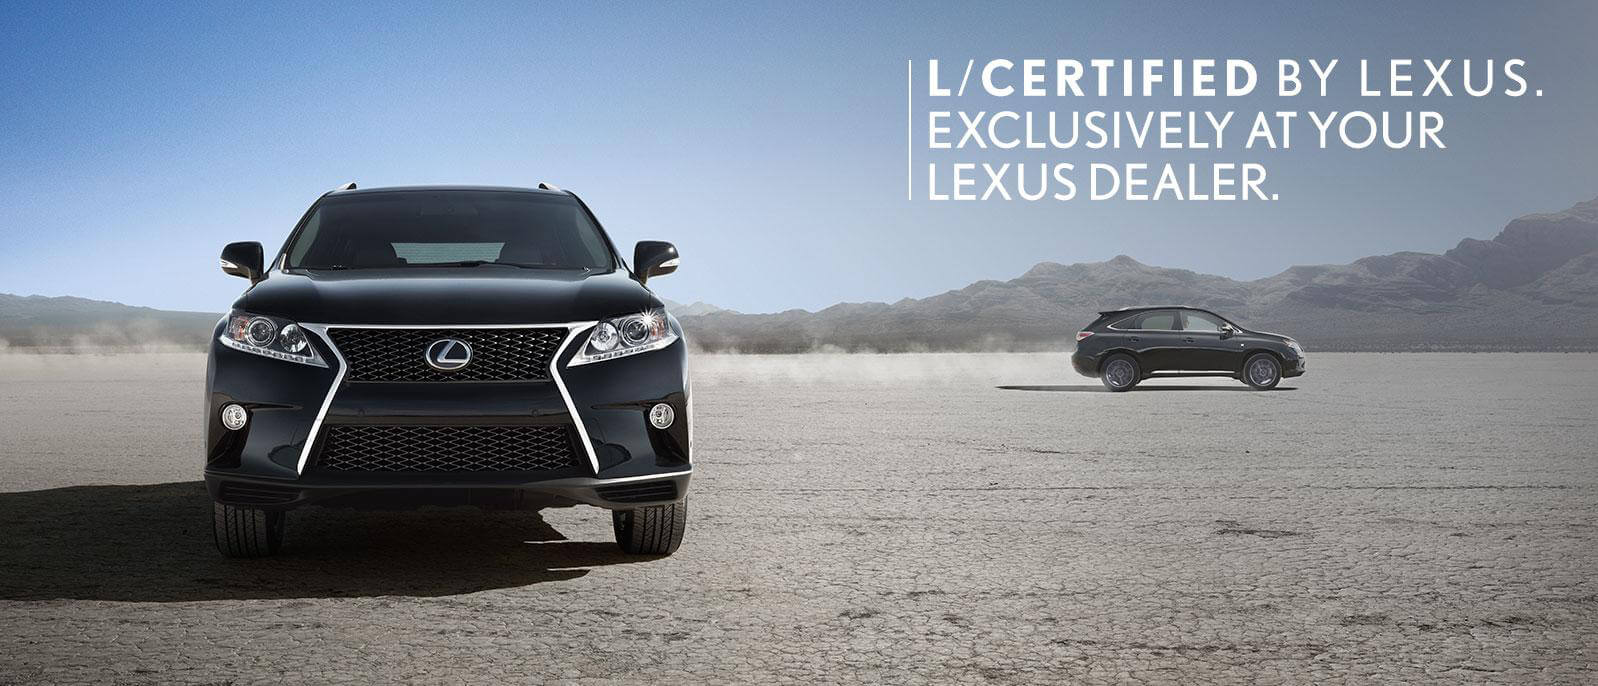 Benefits of Buying L/Certified at Lexus of Lehigh Valley Allentown PA